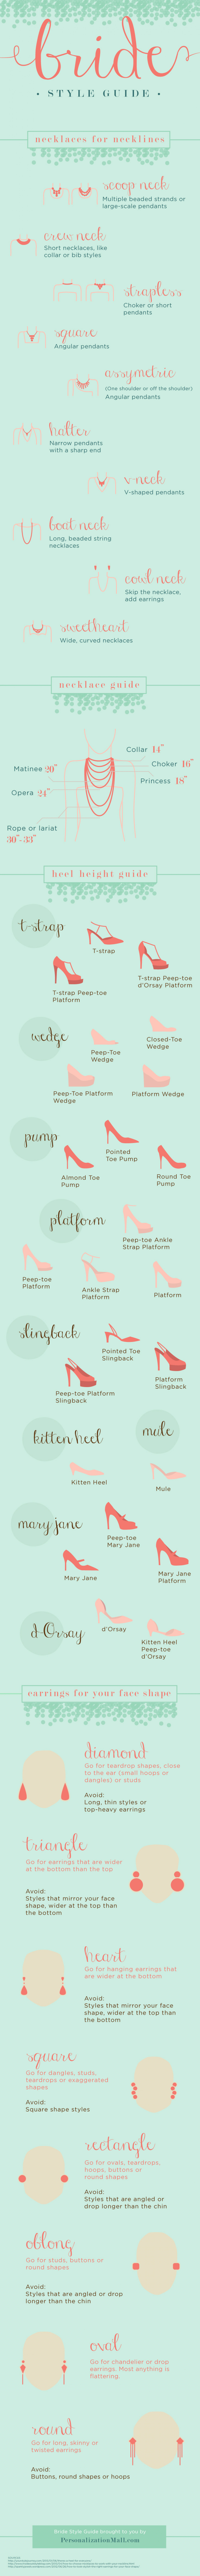 Bride Style Guide Infographic